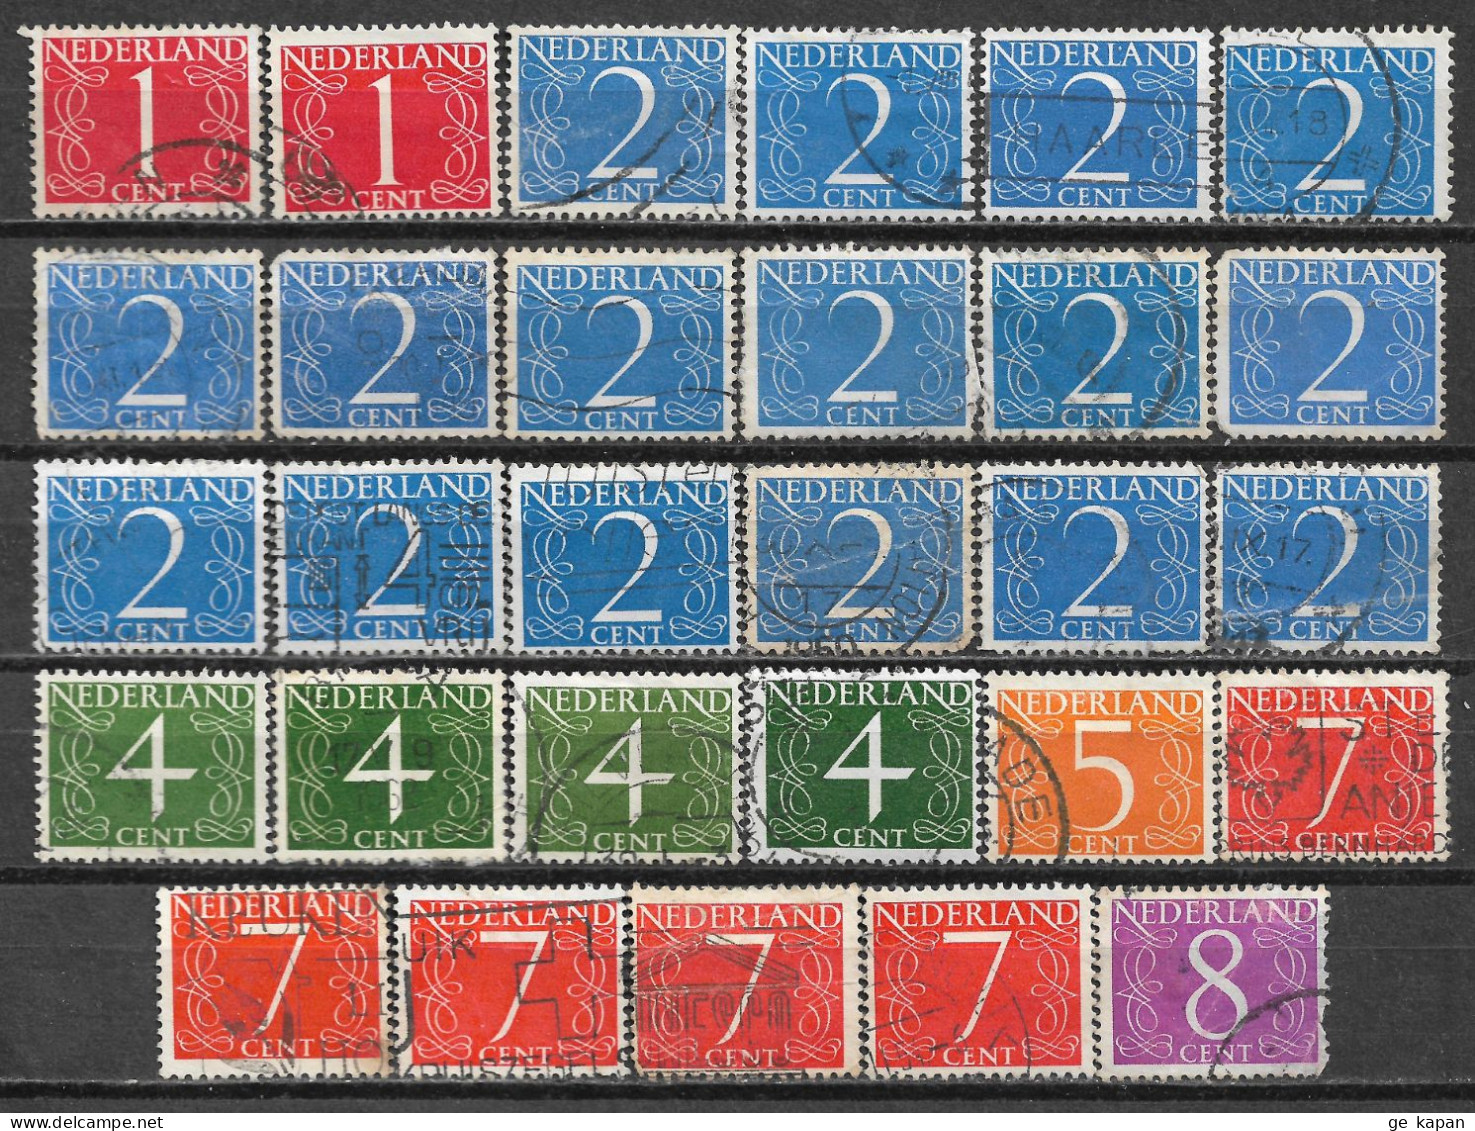 1946-1957 NETHERLANDS 29 Used Stamps (Scott # 282,283,285,341,343,343A) CV $5.80 - Used Stamps